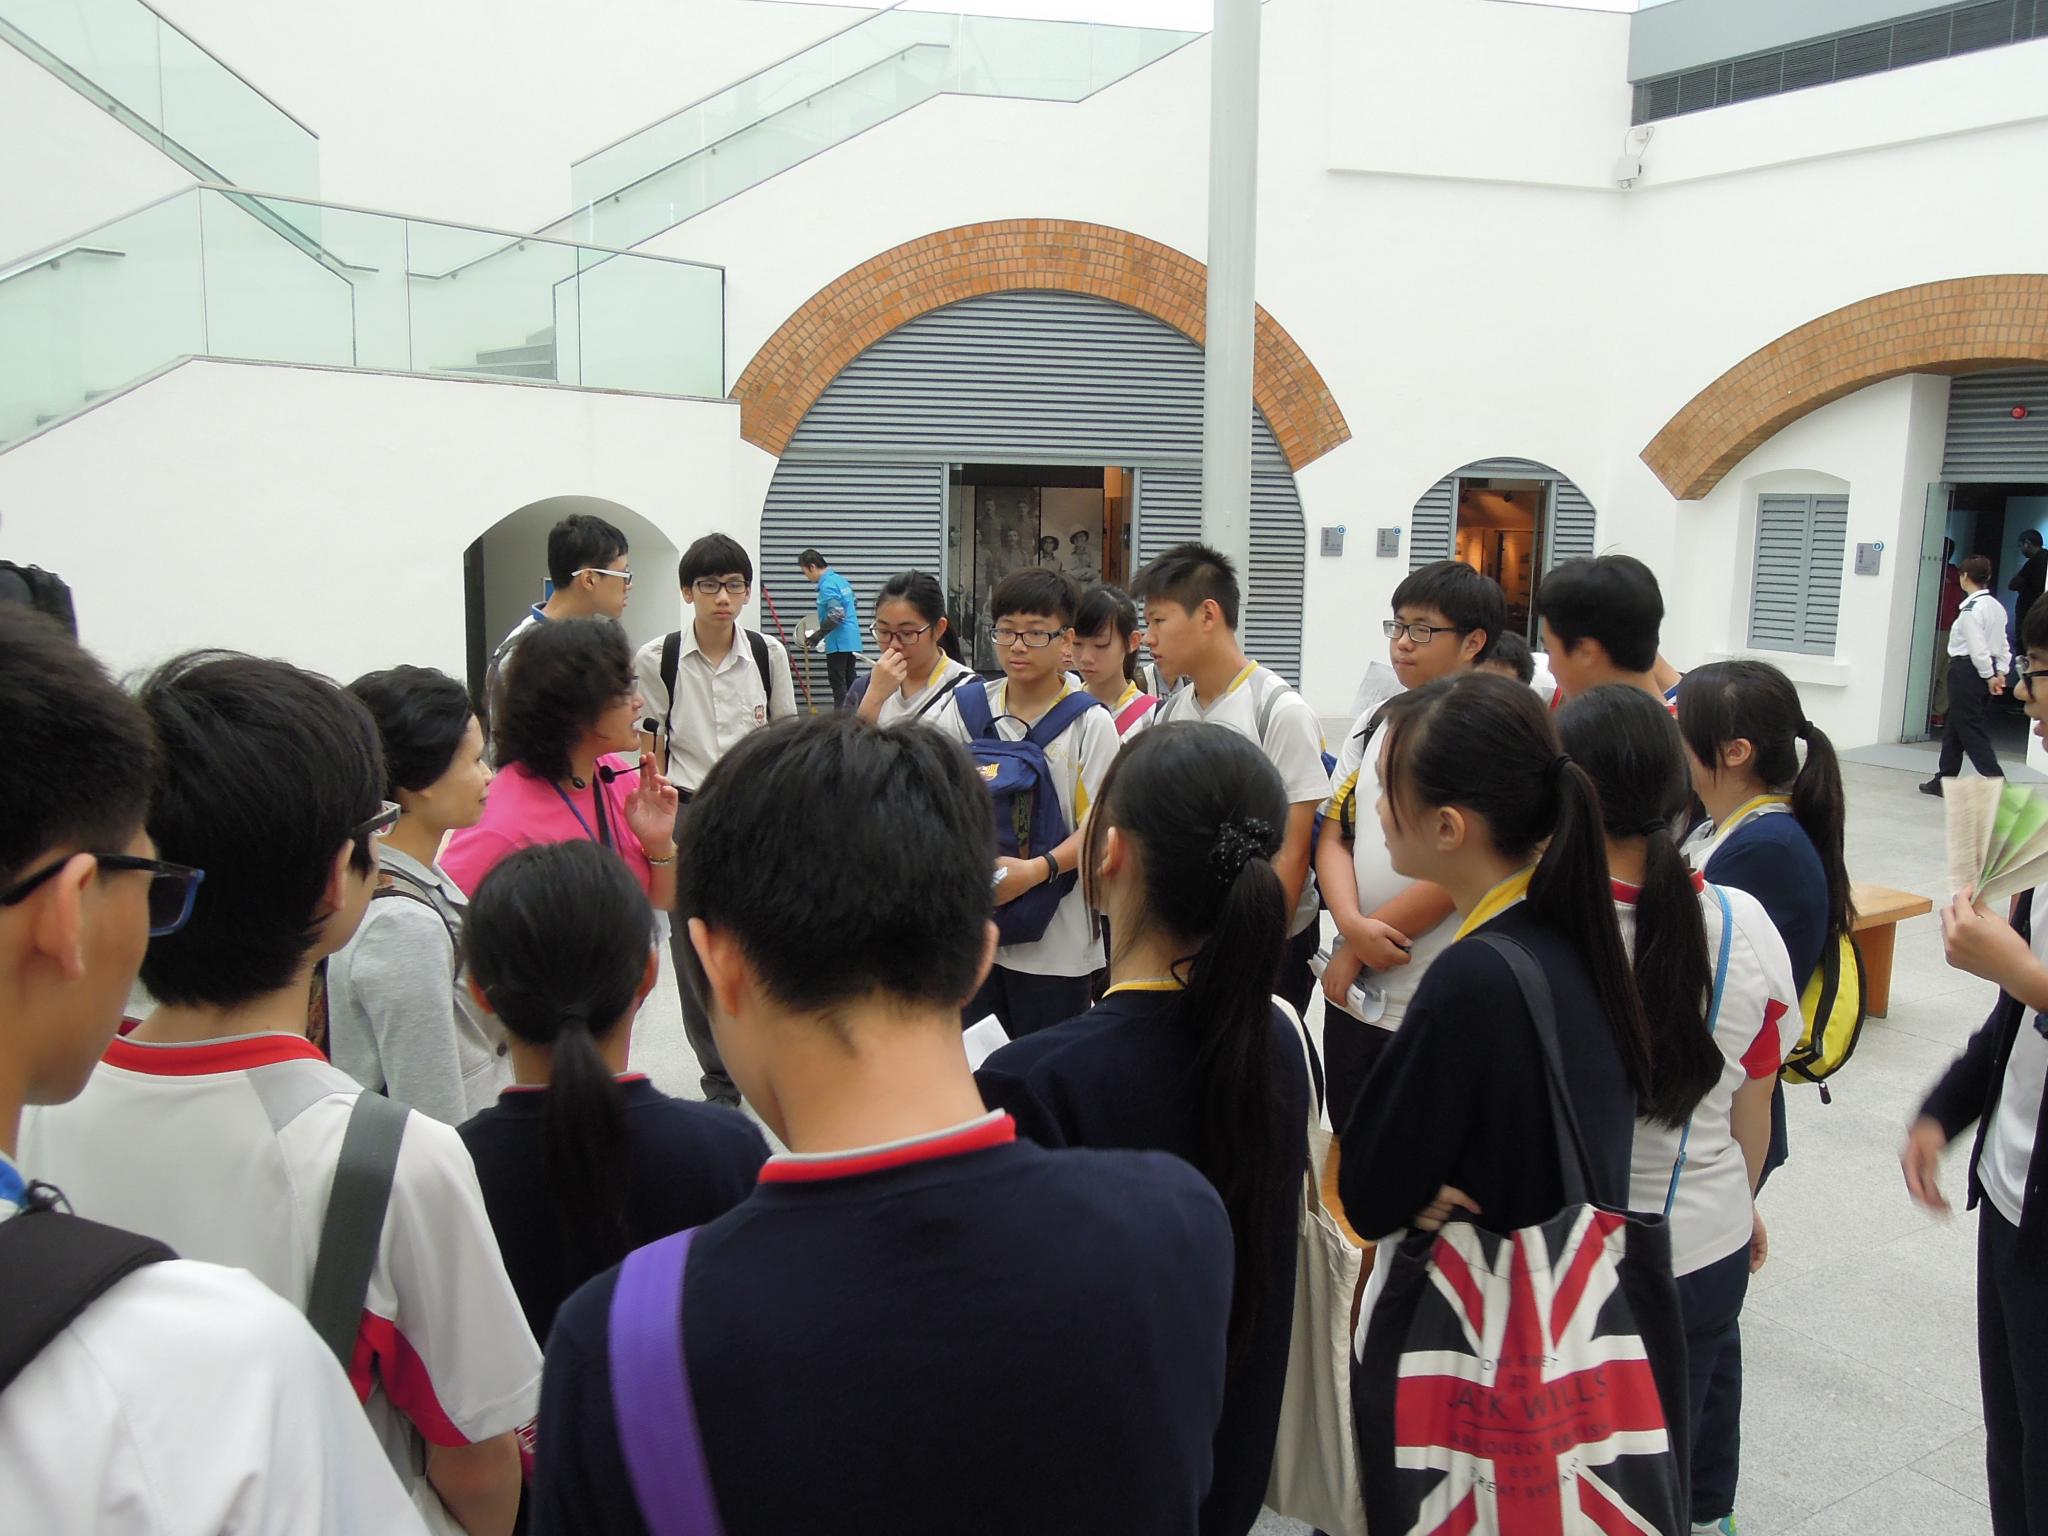 The Museum staff introduce the military history of Hong Kong from Ming Dynasty to the present days to our students.